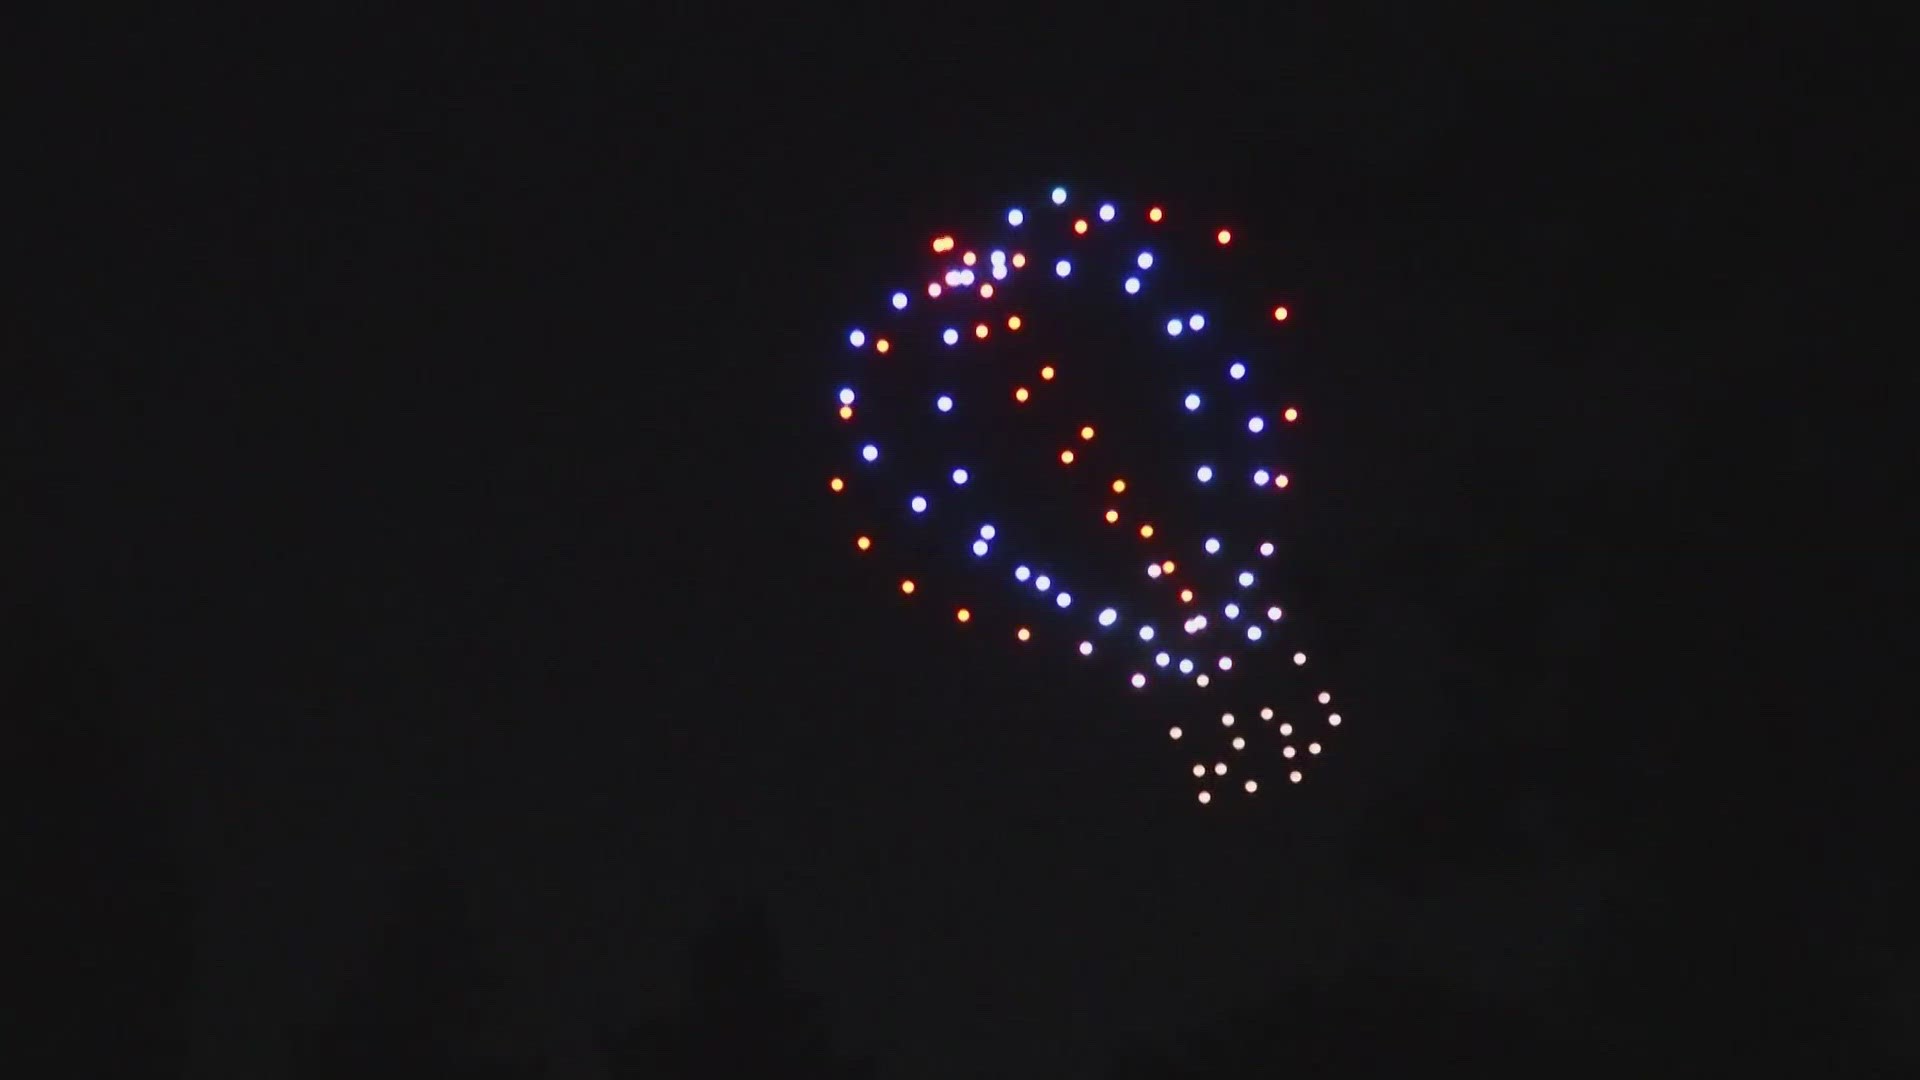 Hagan Community Park is the place to be for Independence Day. This is considered the biggest fireworks show in the Sacramento area this year.